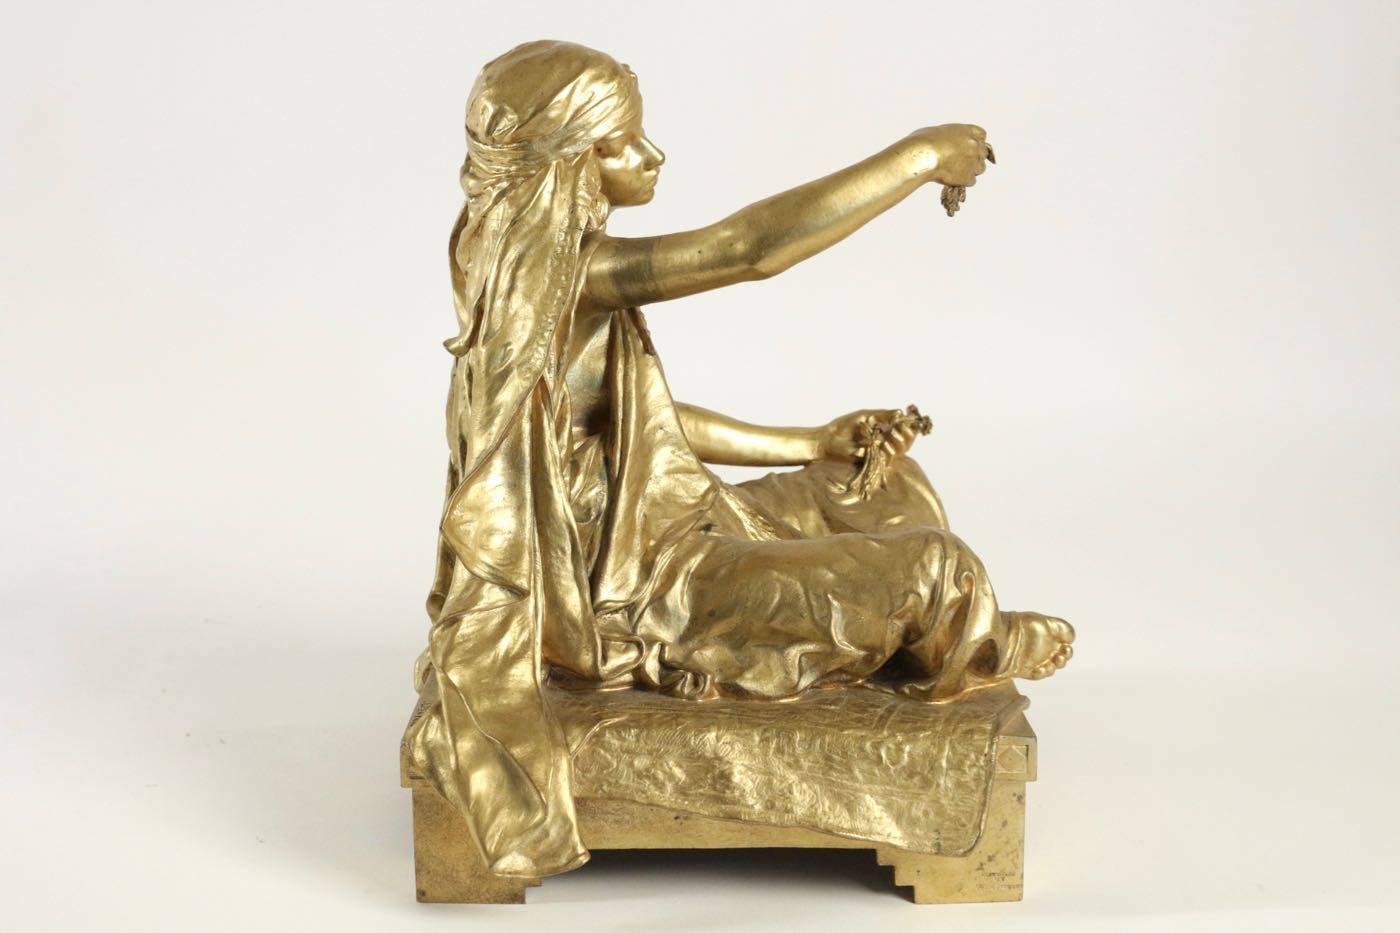 French Bronze by Louis Ernest Barrias, “Little Girl Seated”